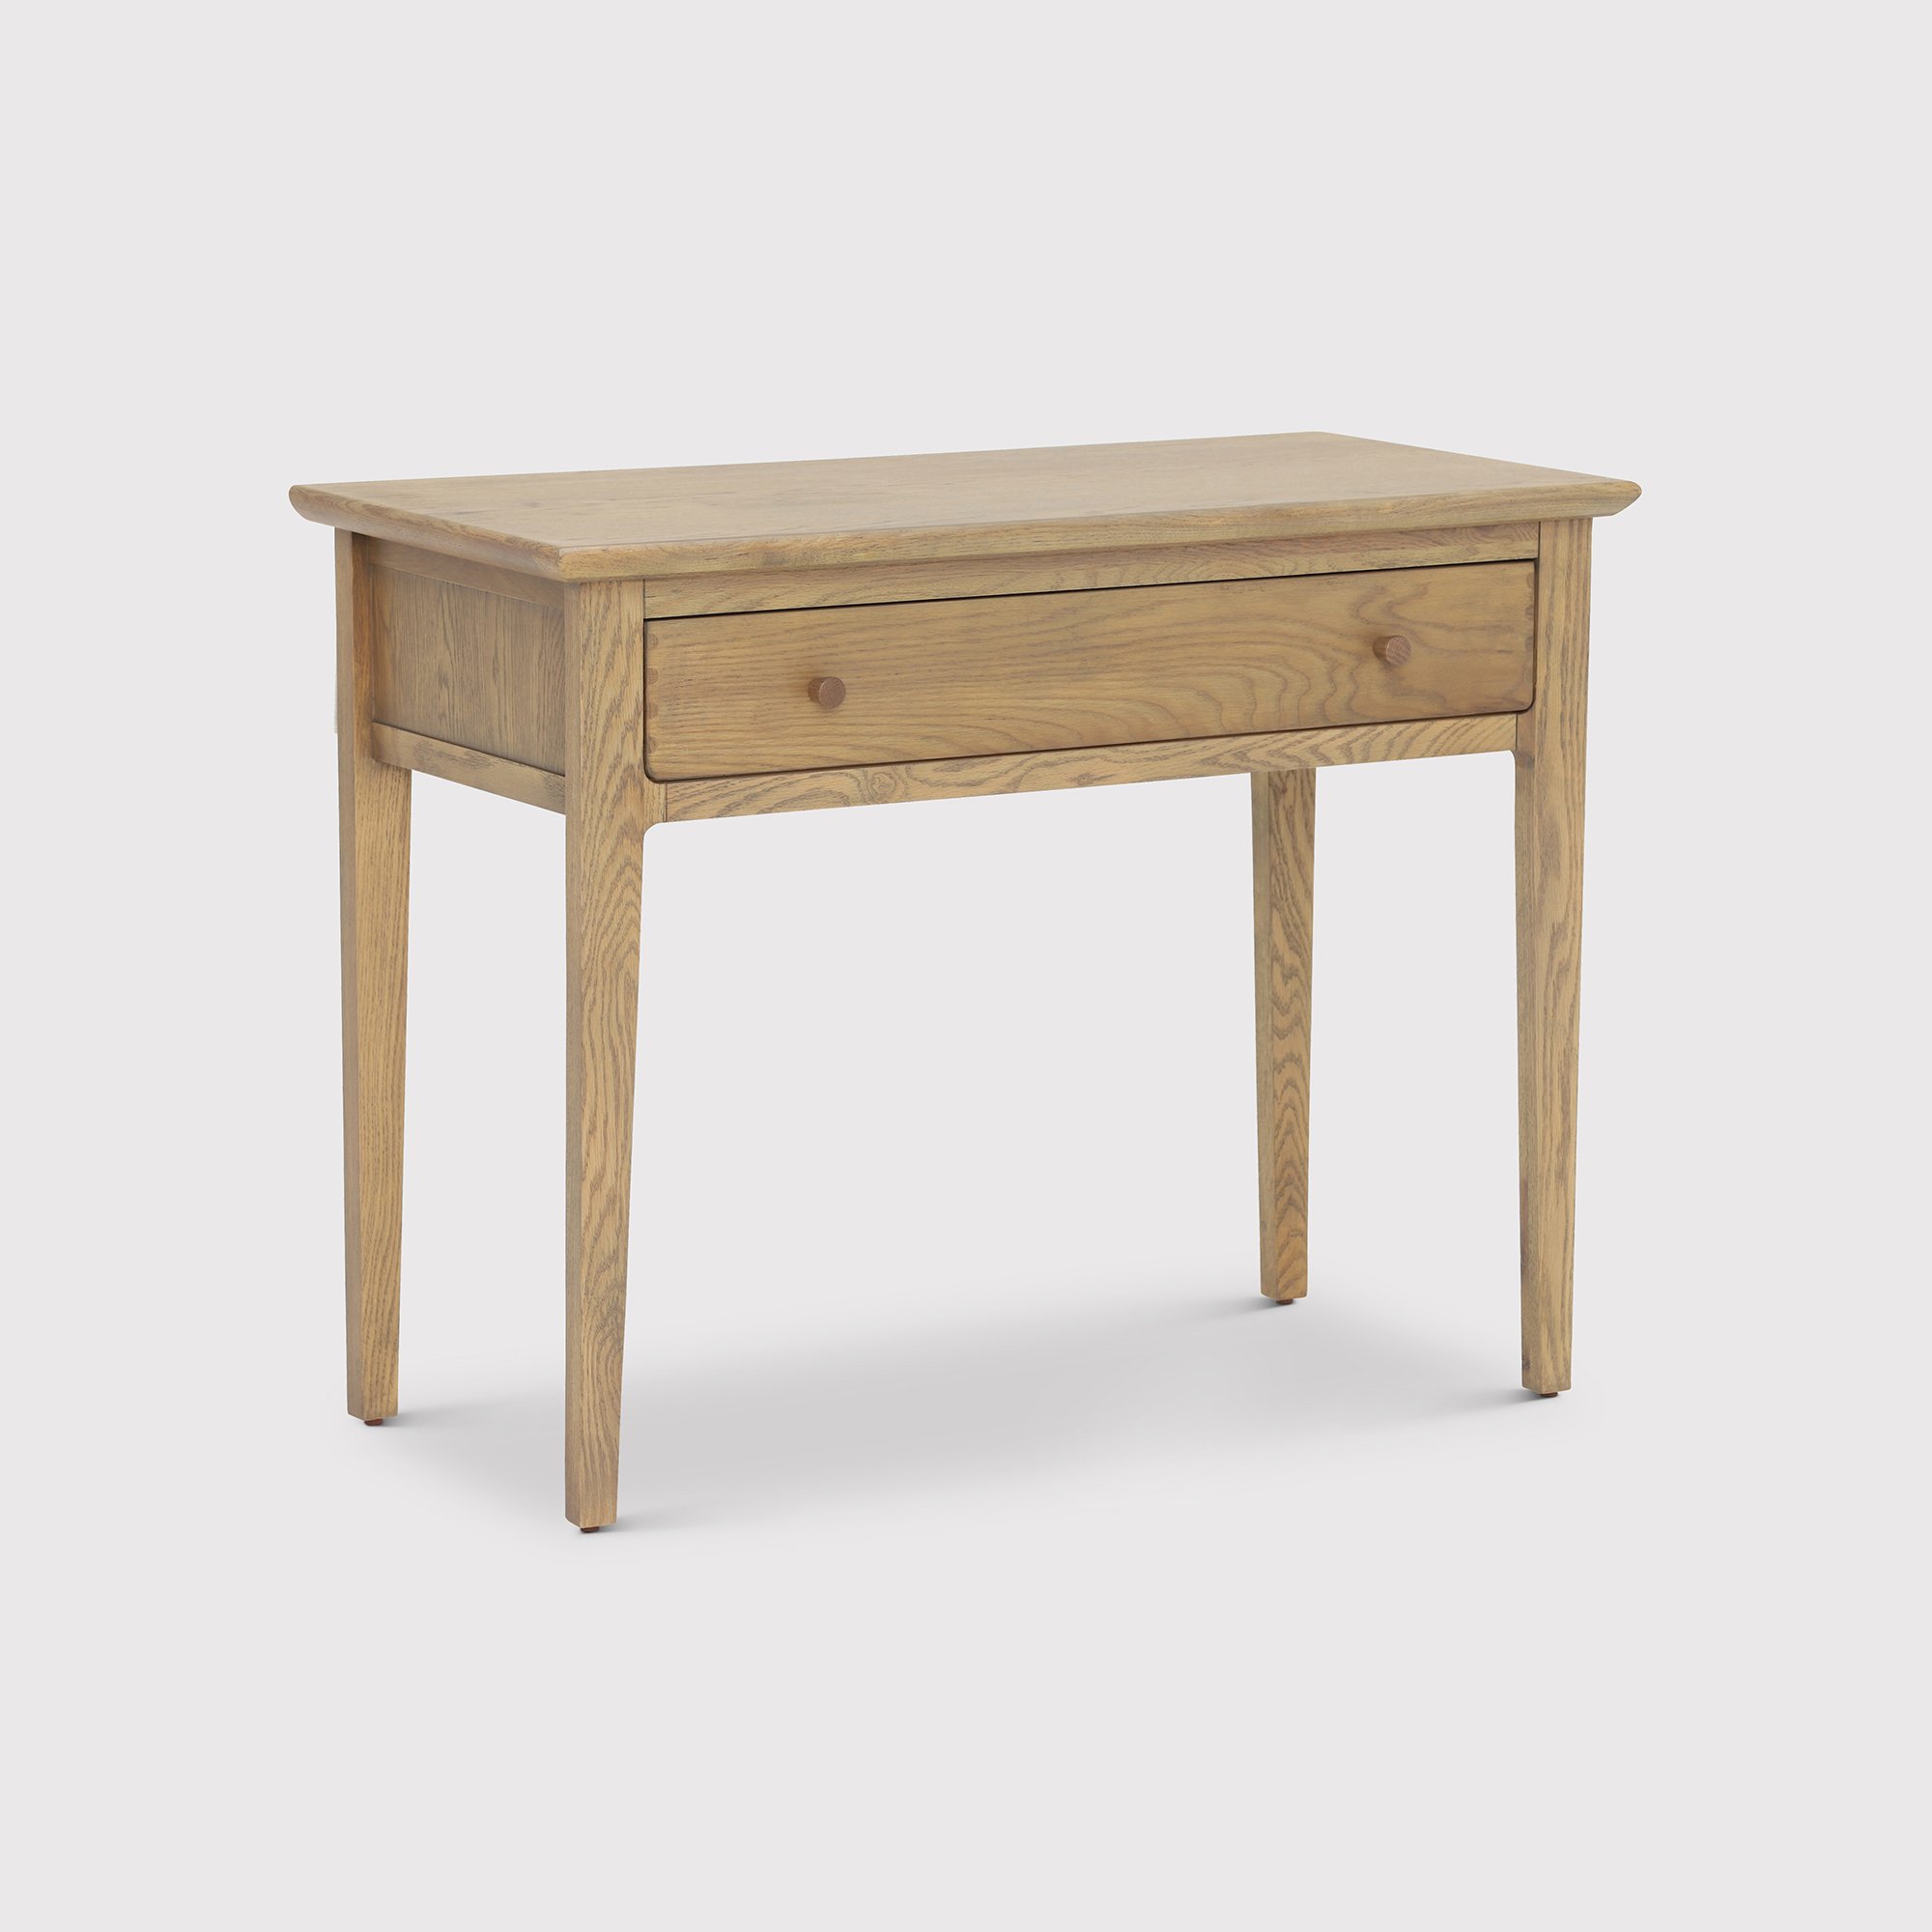 Photo of Runswick dressing table in brown